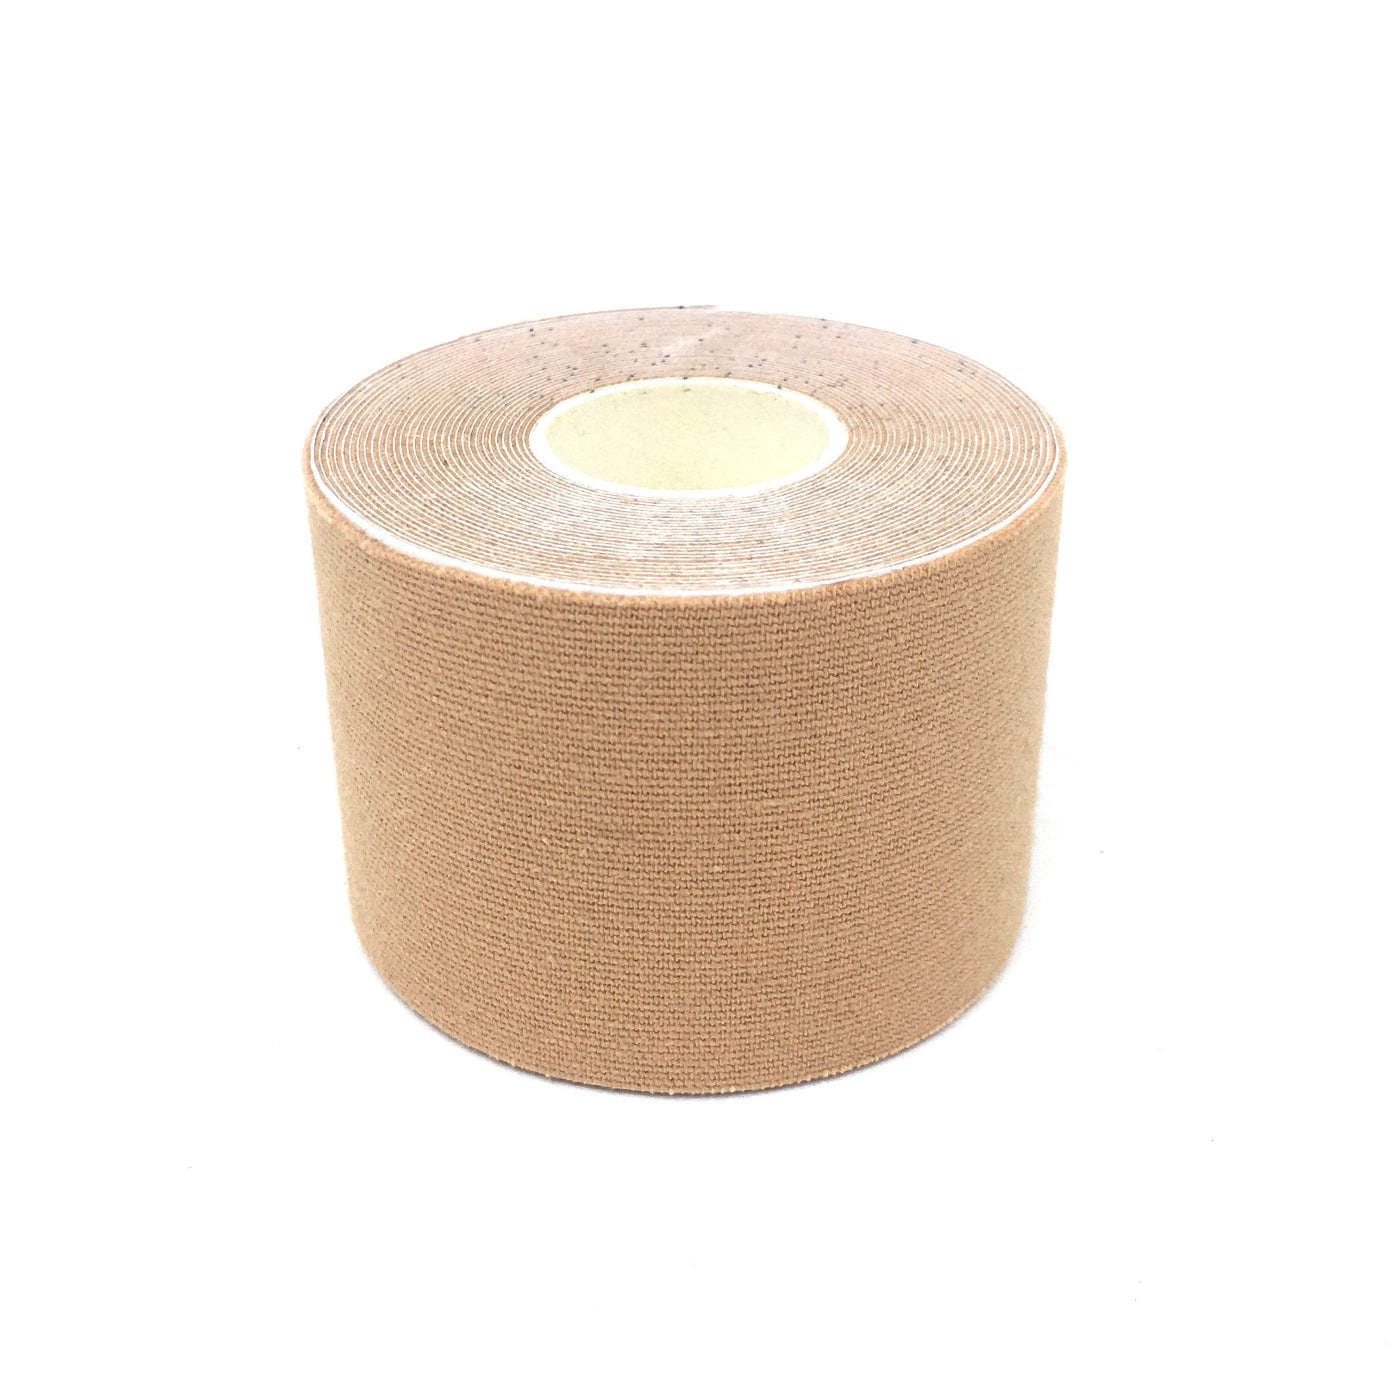 Direct Supplier KT TAPE - Binding with TransTape/KT tape (Open